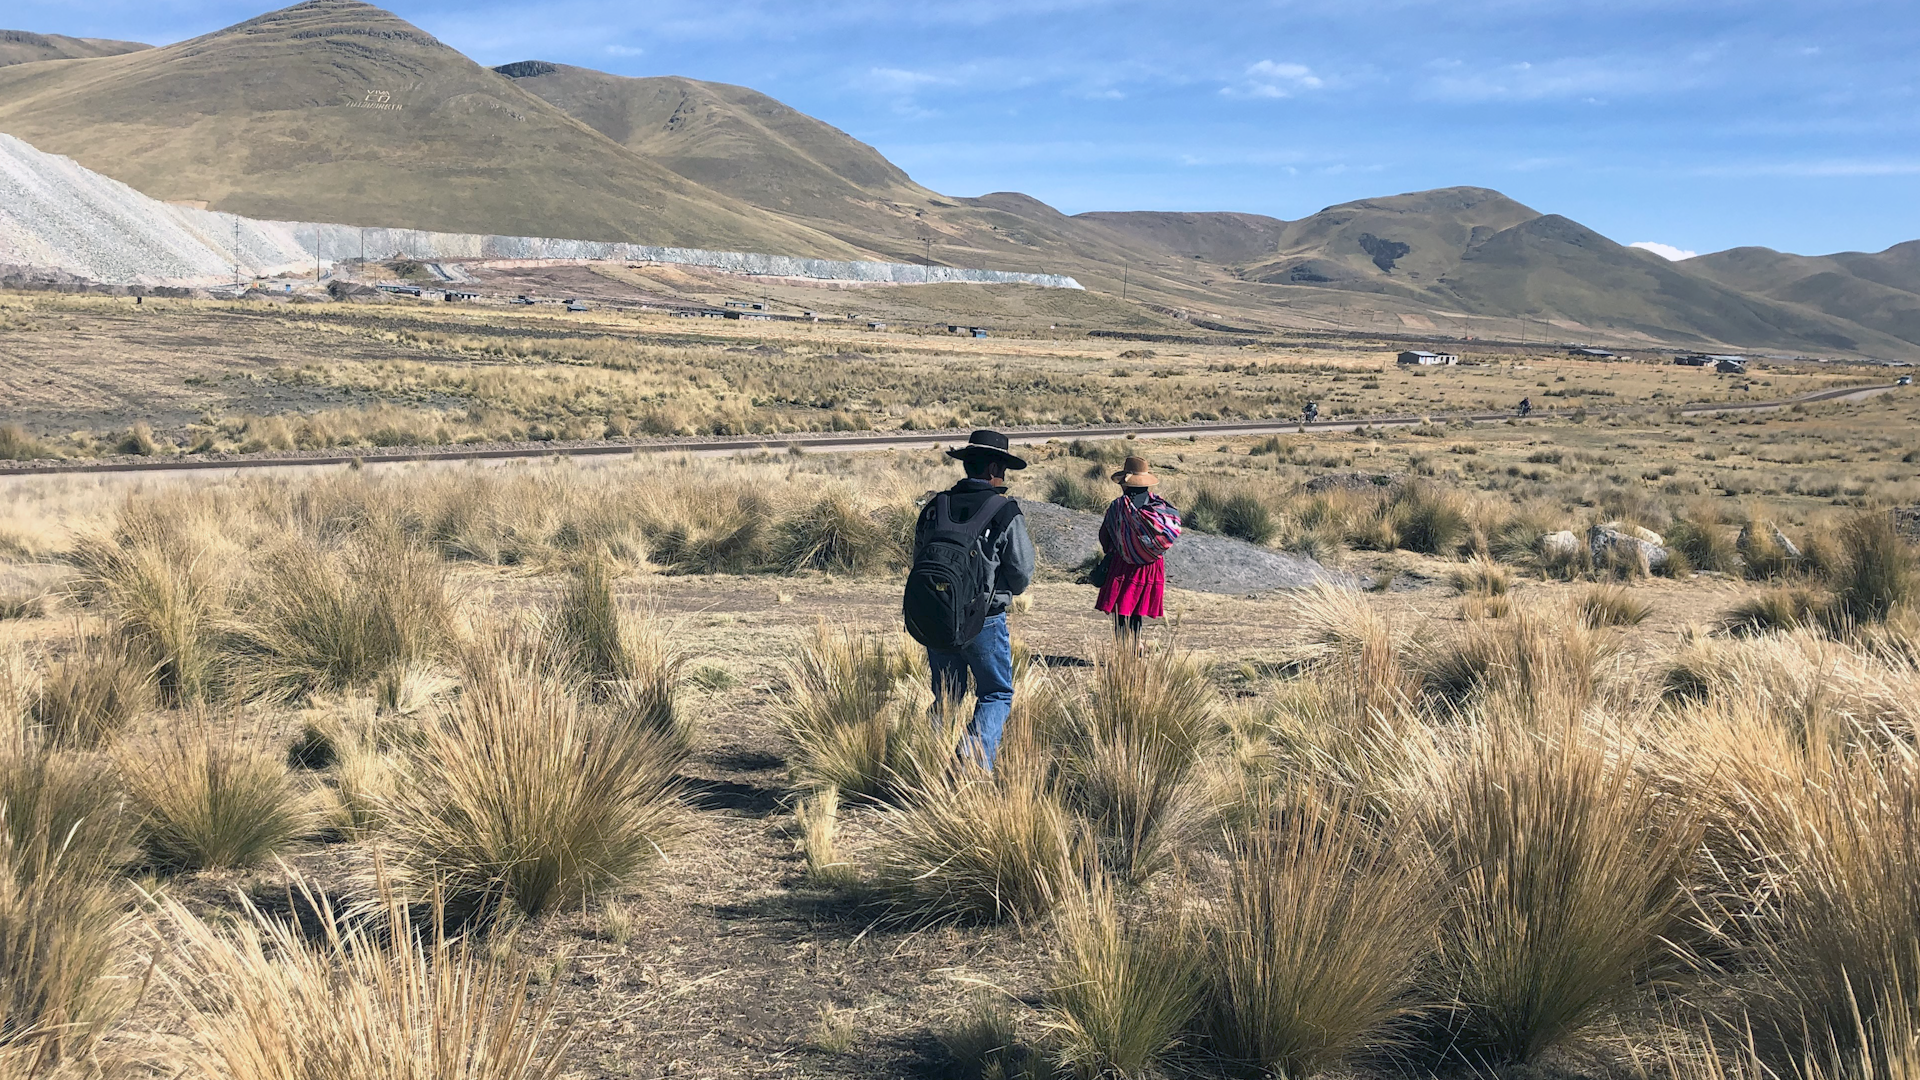 Man and woman walking across the pasture, southeastern Peruvian district of Espinar